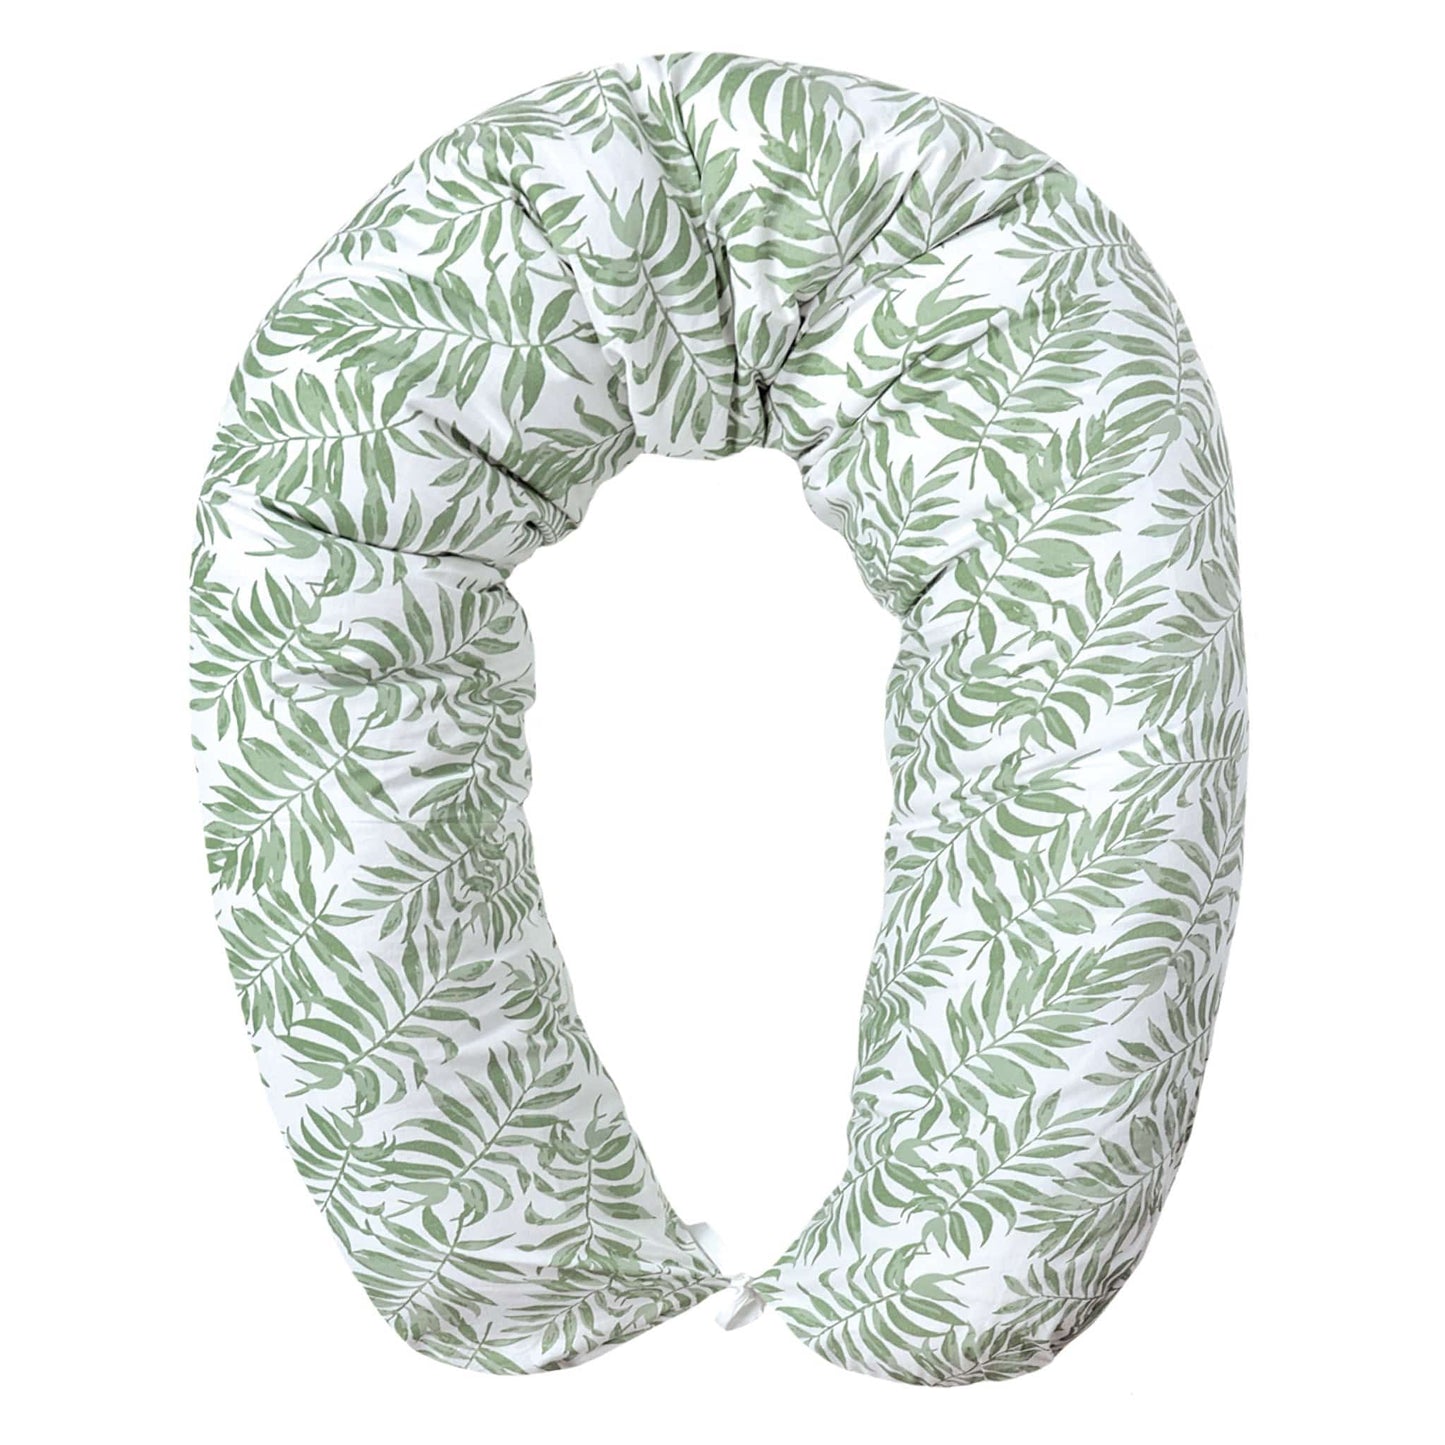 Multifunctional pregnancy pillow - Tropical green